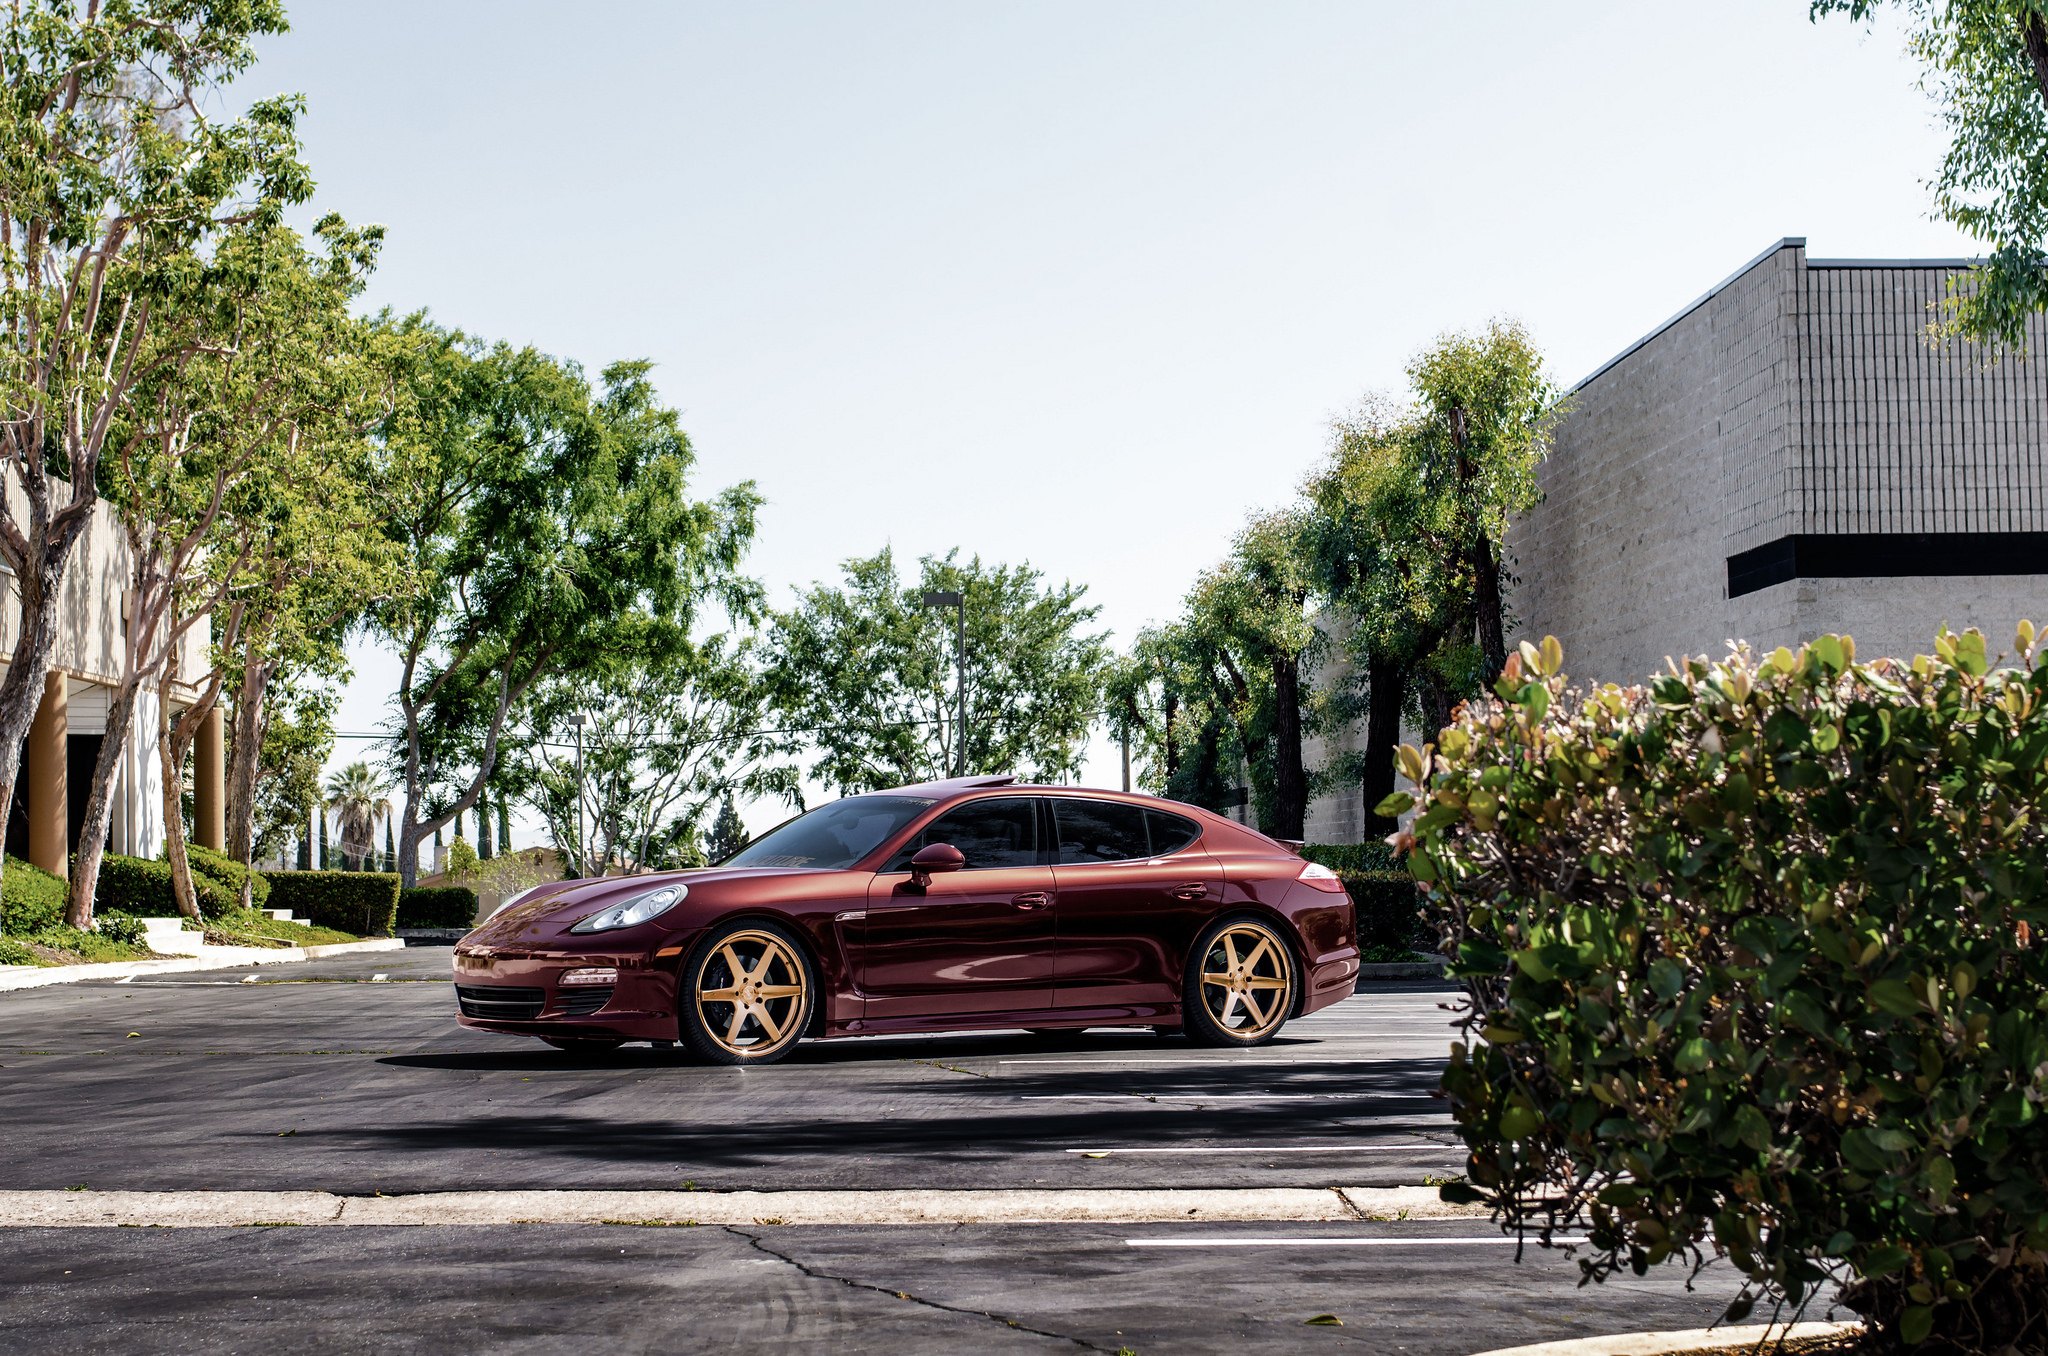 Gold Concept One Rims on Red Porsche Panamera - Photo by Concept One